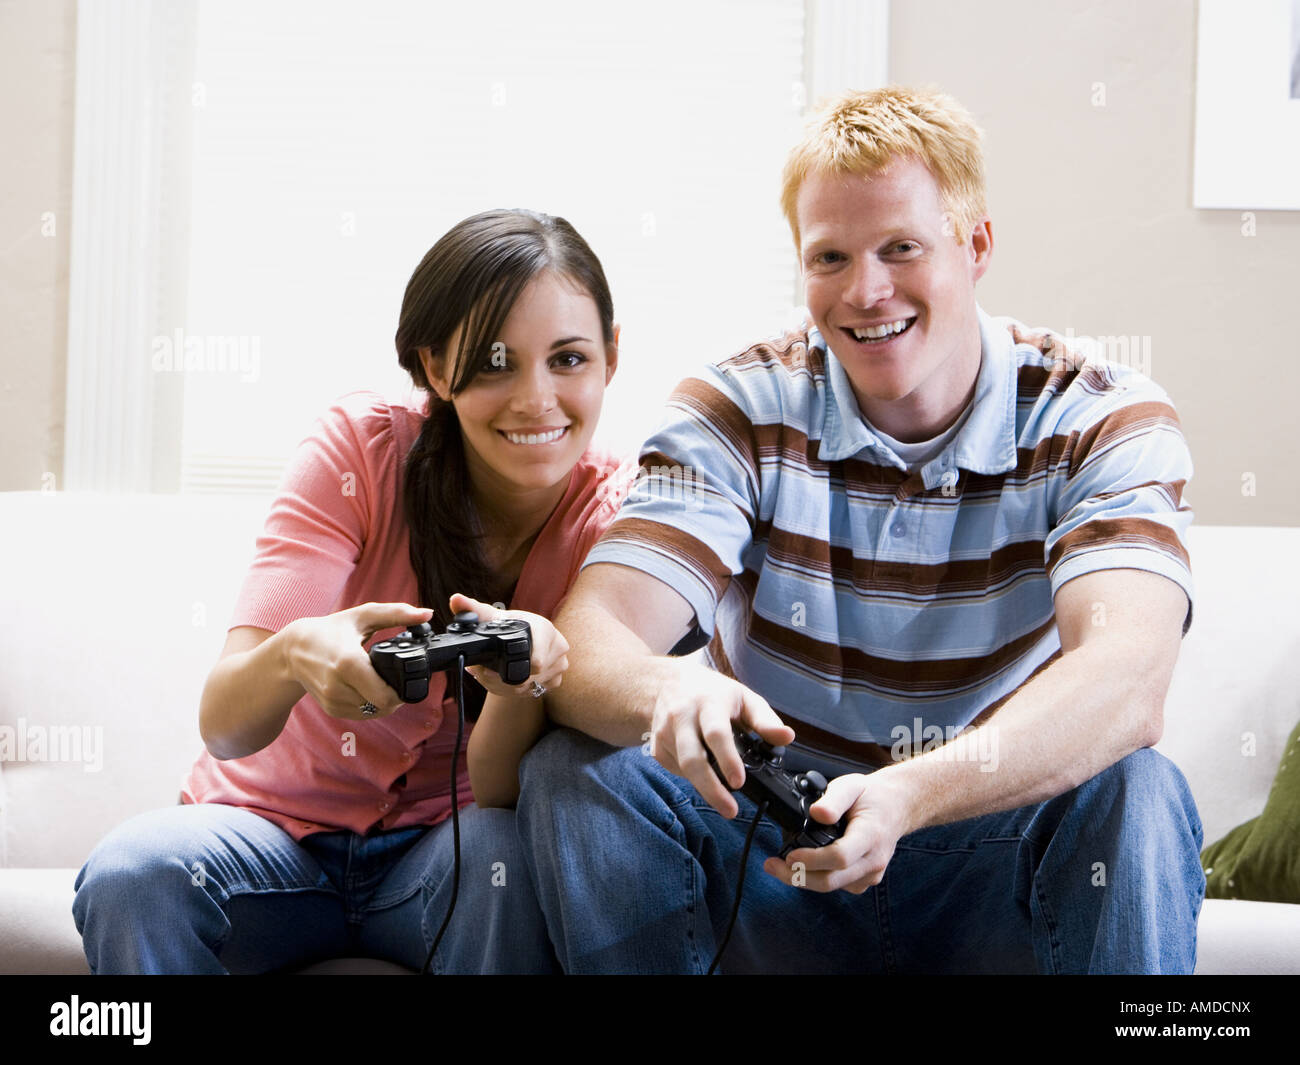 Man and woman on sofa playing video games Stock Photo